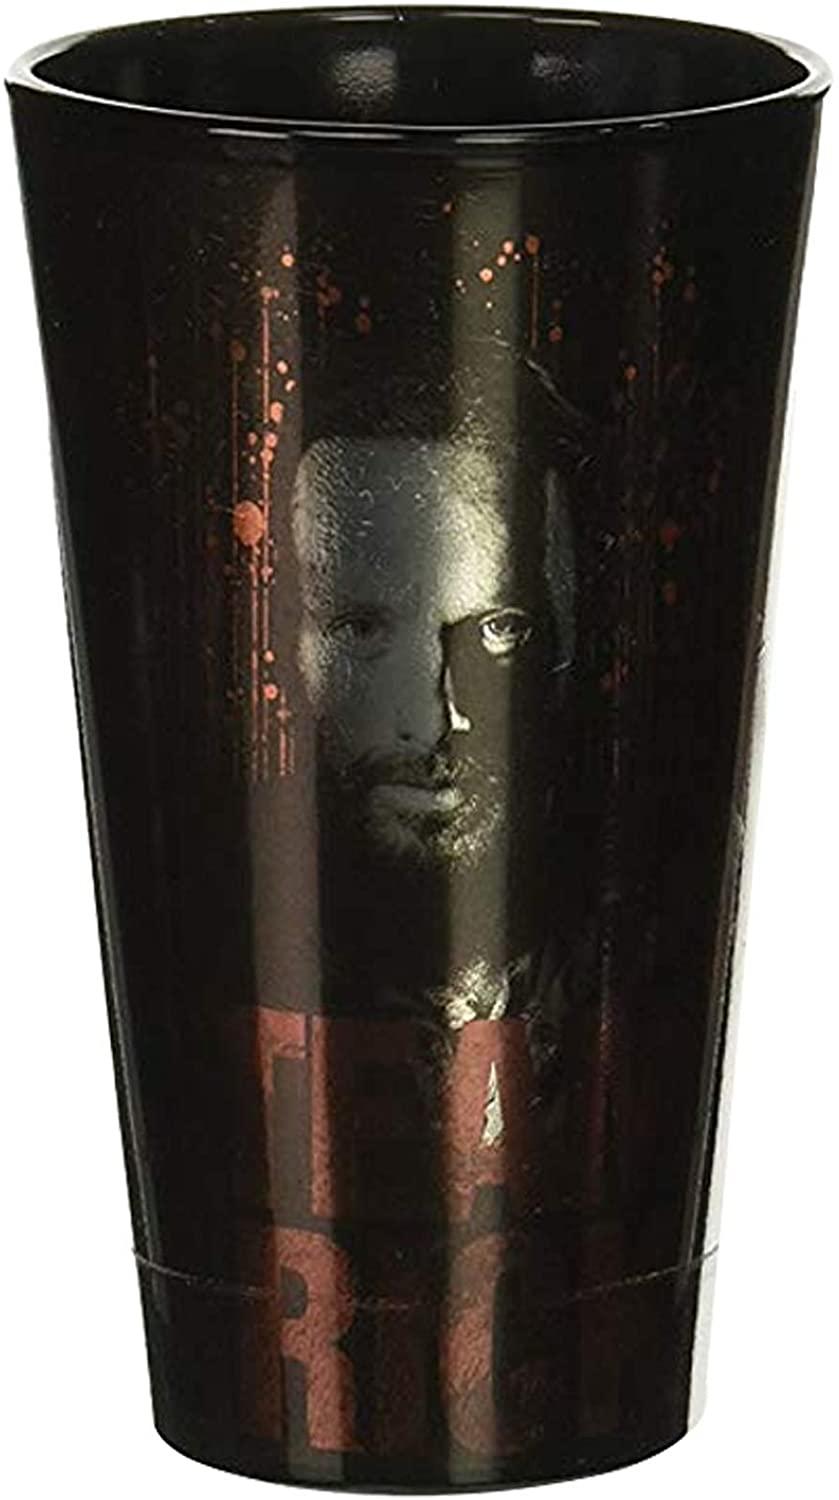 The Walking Dead Daryl, Rick, and Zombies Metallic Foil Pint Glasses set of 4